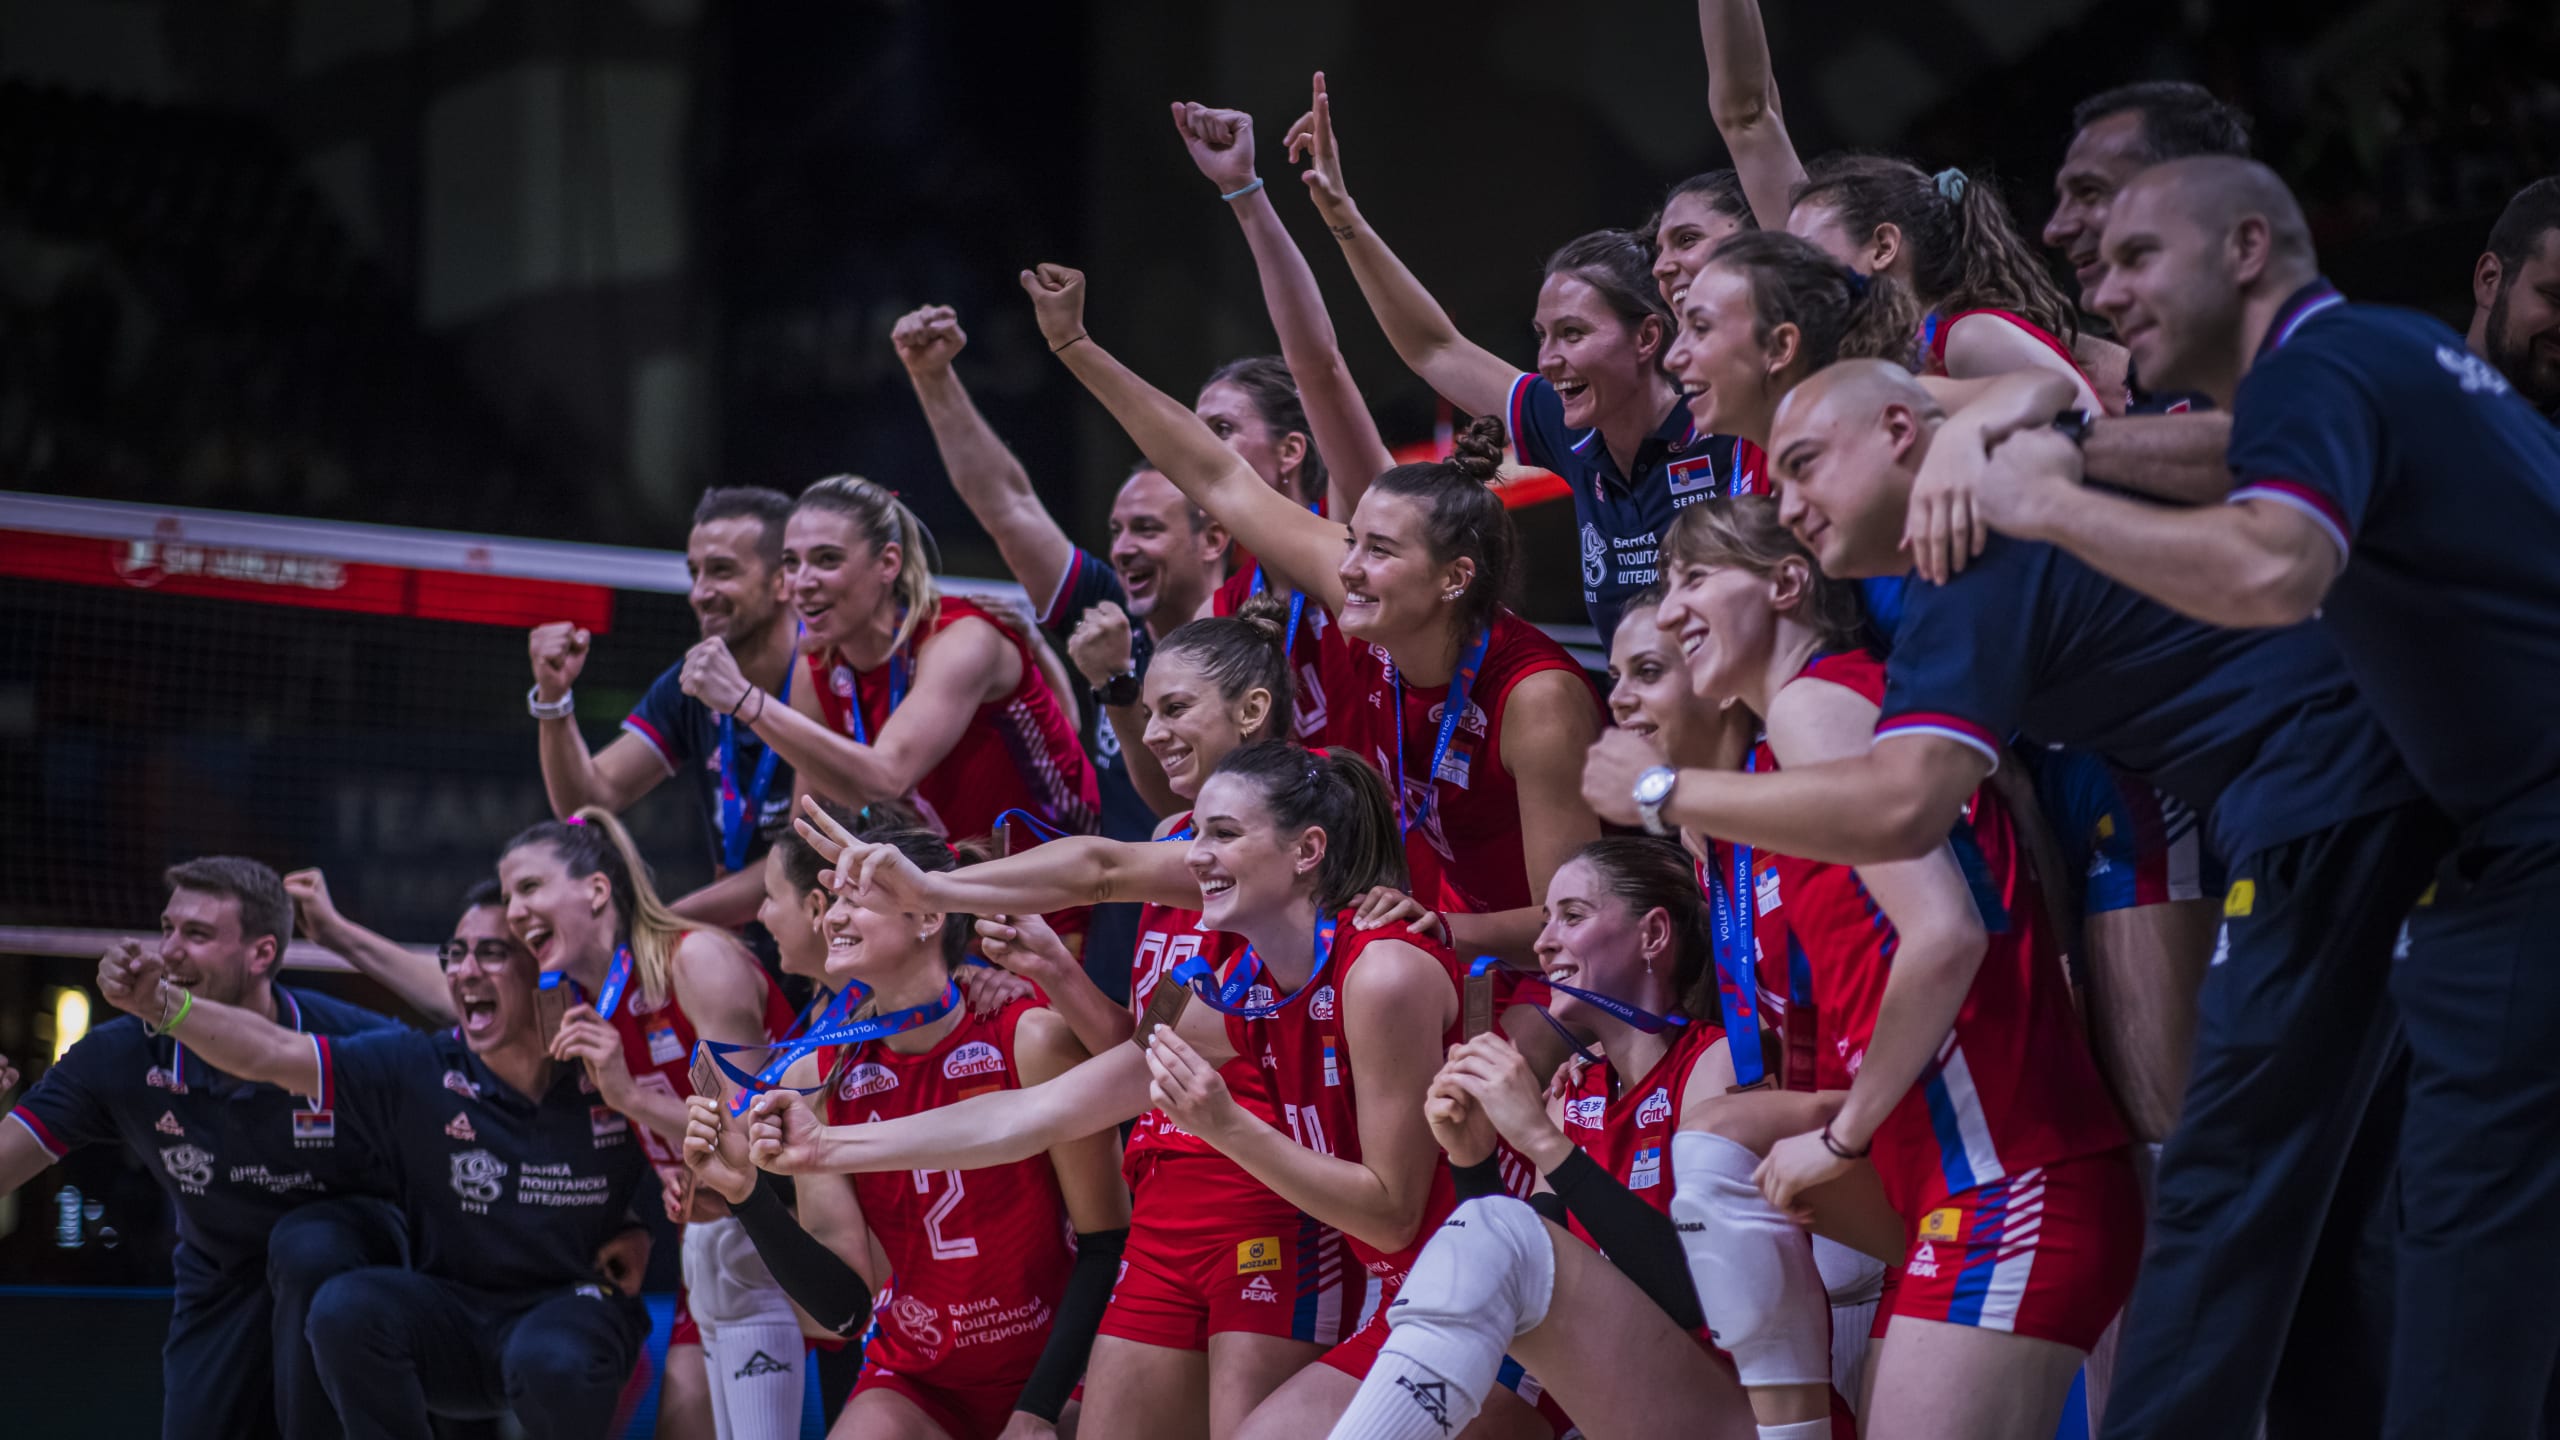 Year in Review European Teams at the VNL CEV